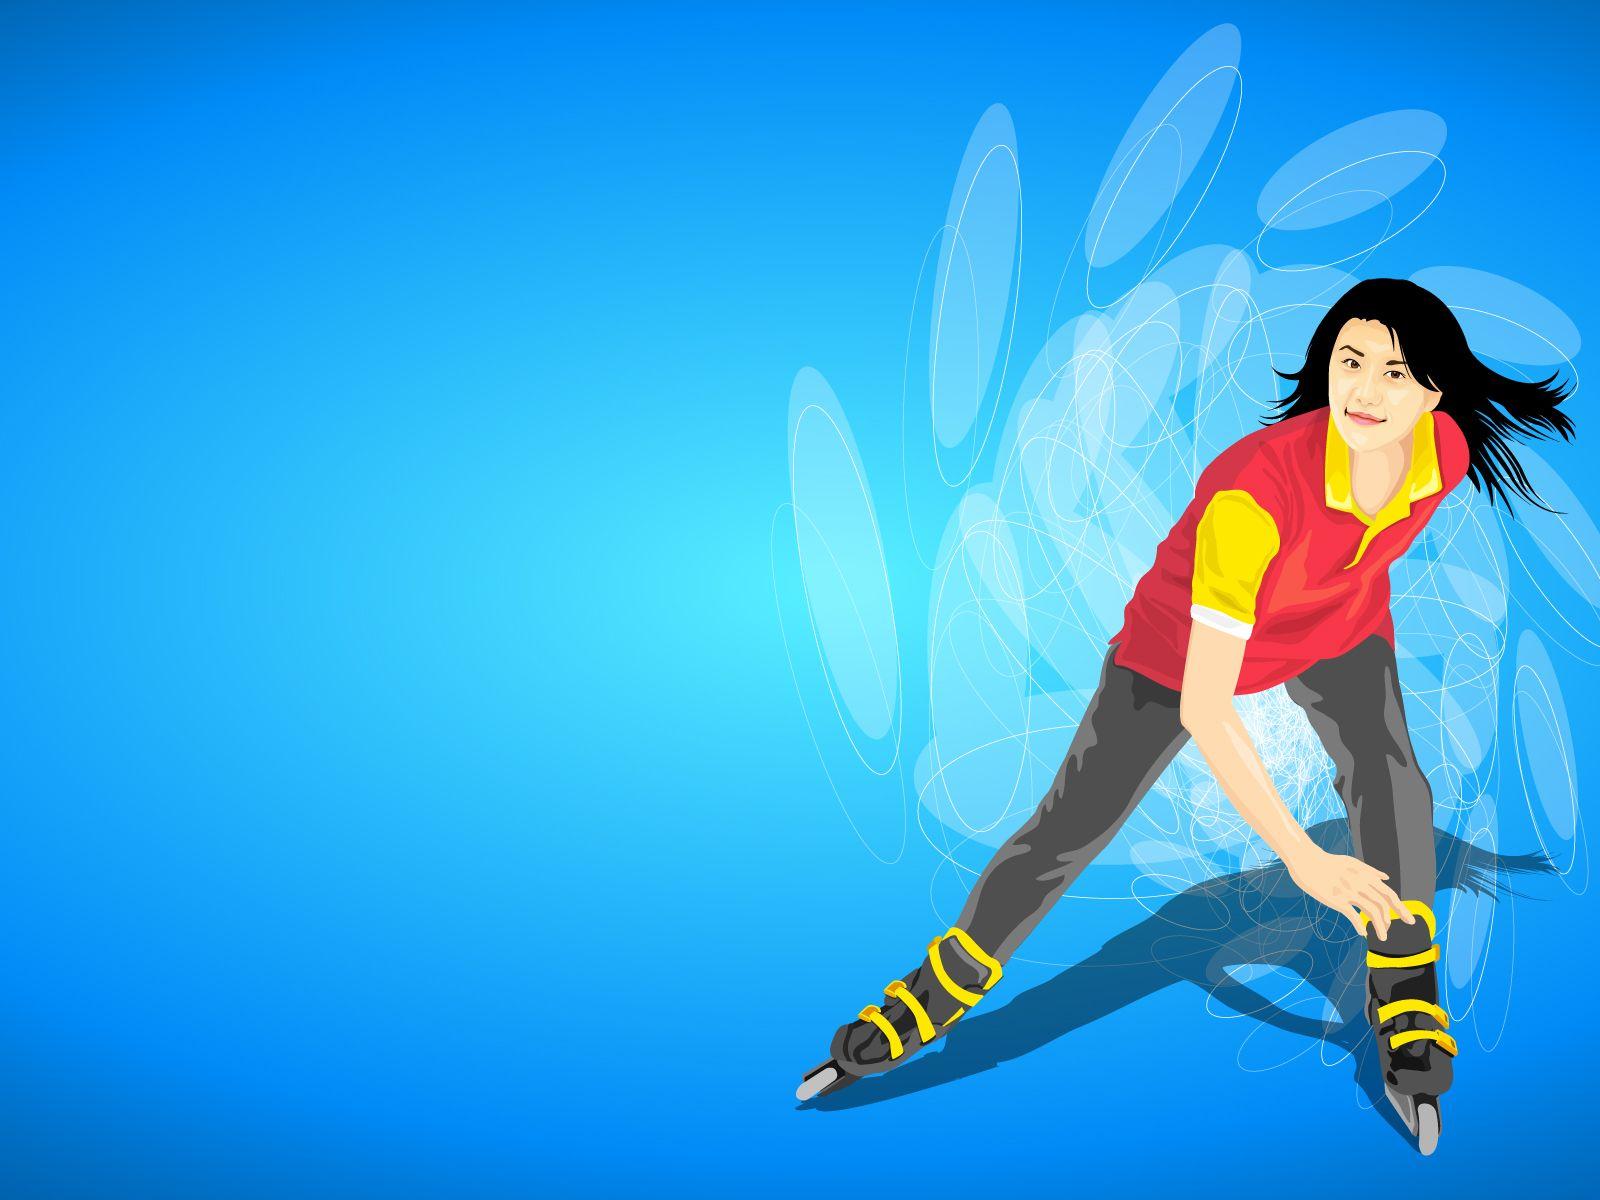 Roller Skating Background for PowerPoint